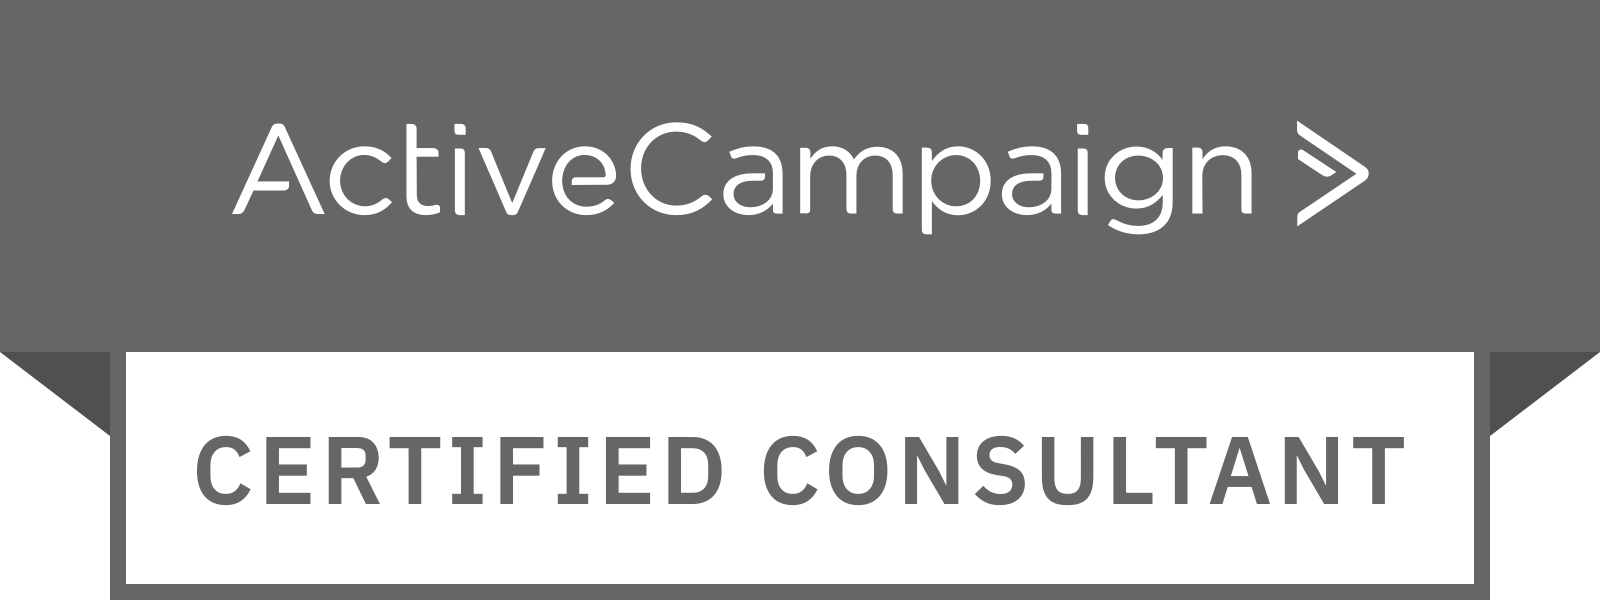 the logo for active campaign is a certified consultant